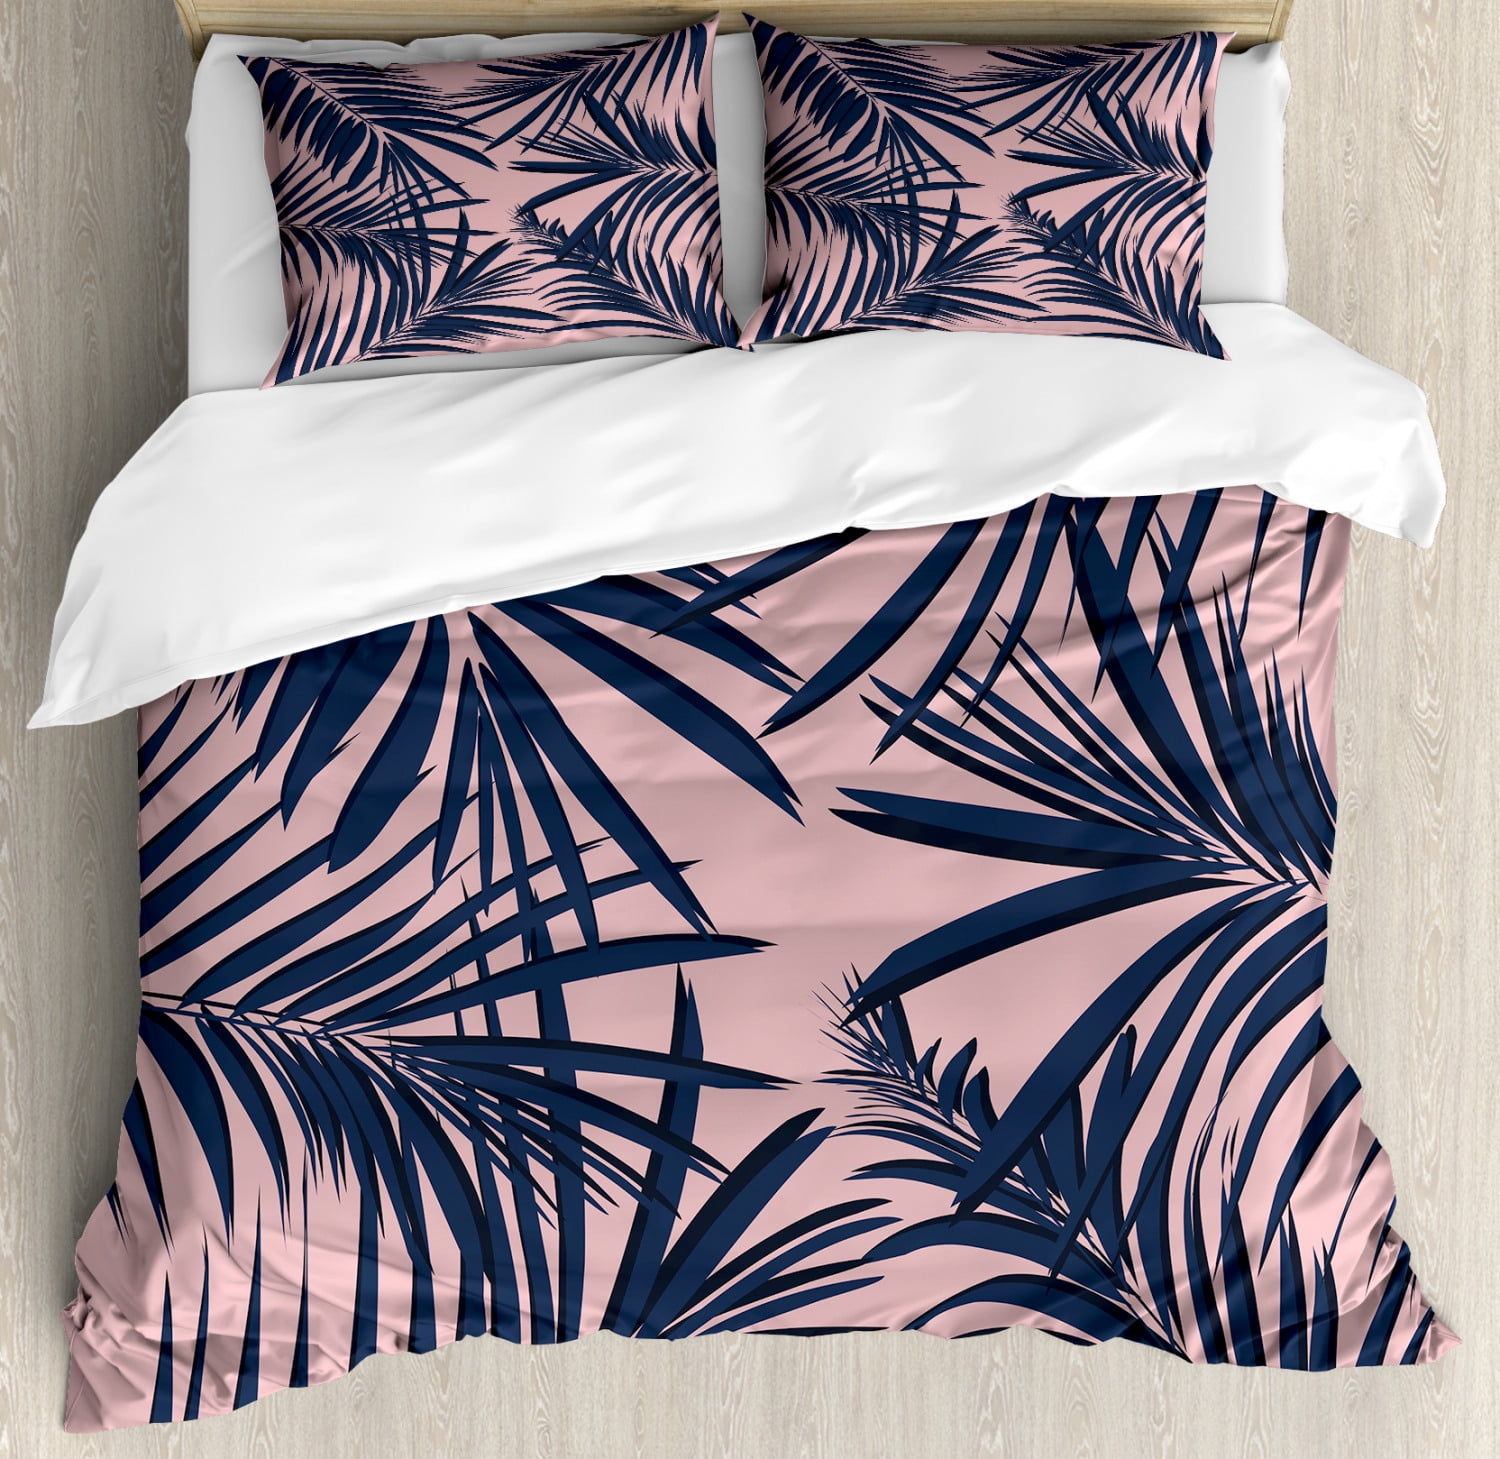 Blush Duvet Cover Set King Size, King Size Bedspread With Palm Trees